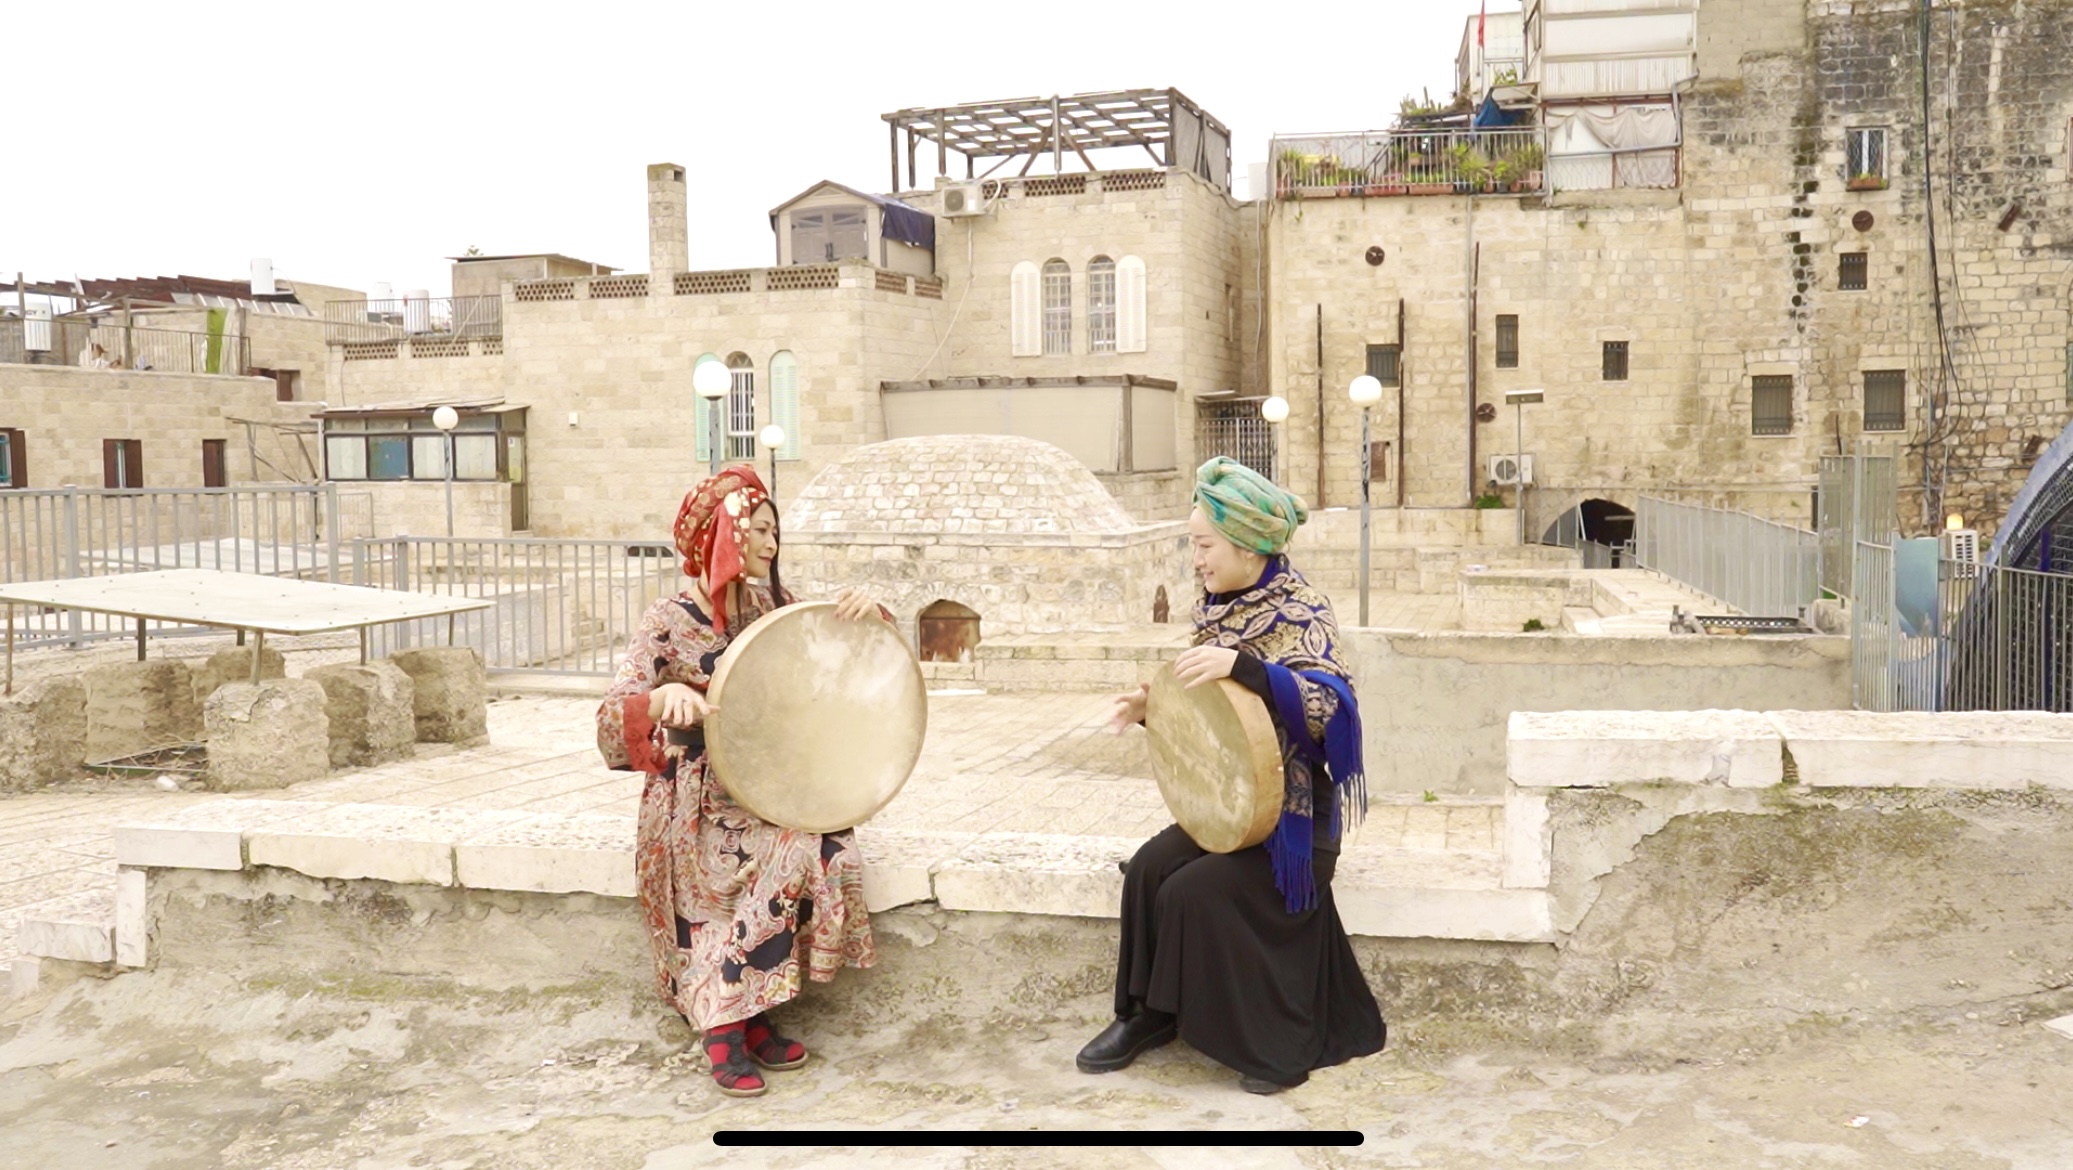 Ke Guo and Japanese musician Okaniwa Yayoi wearing bright traditional clothing and playing instruments in Jerusalem's Old City.